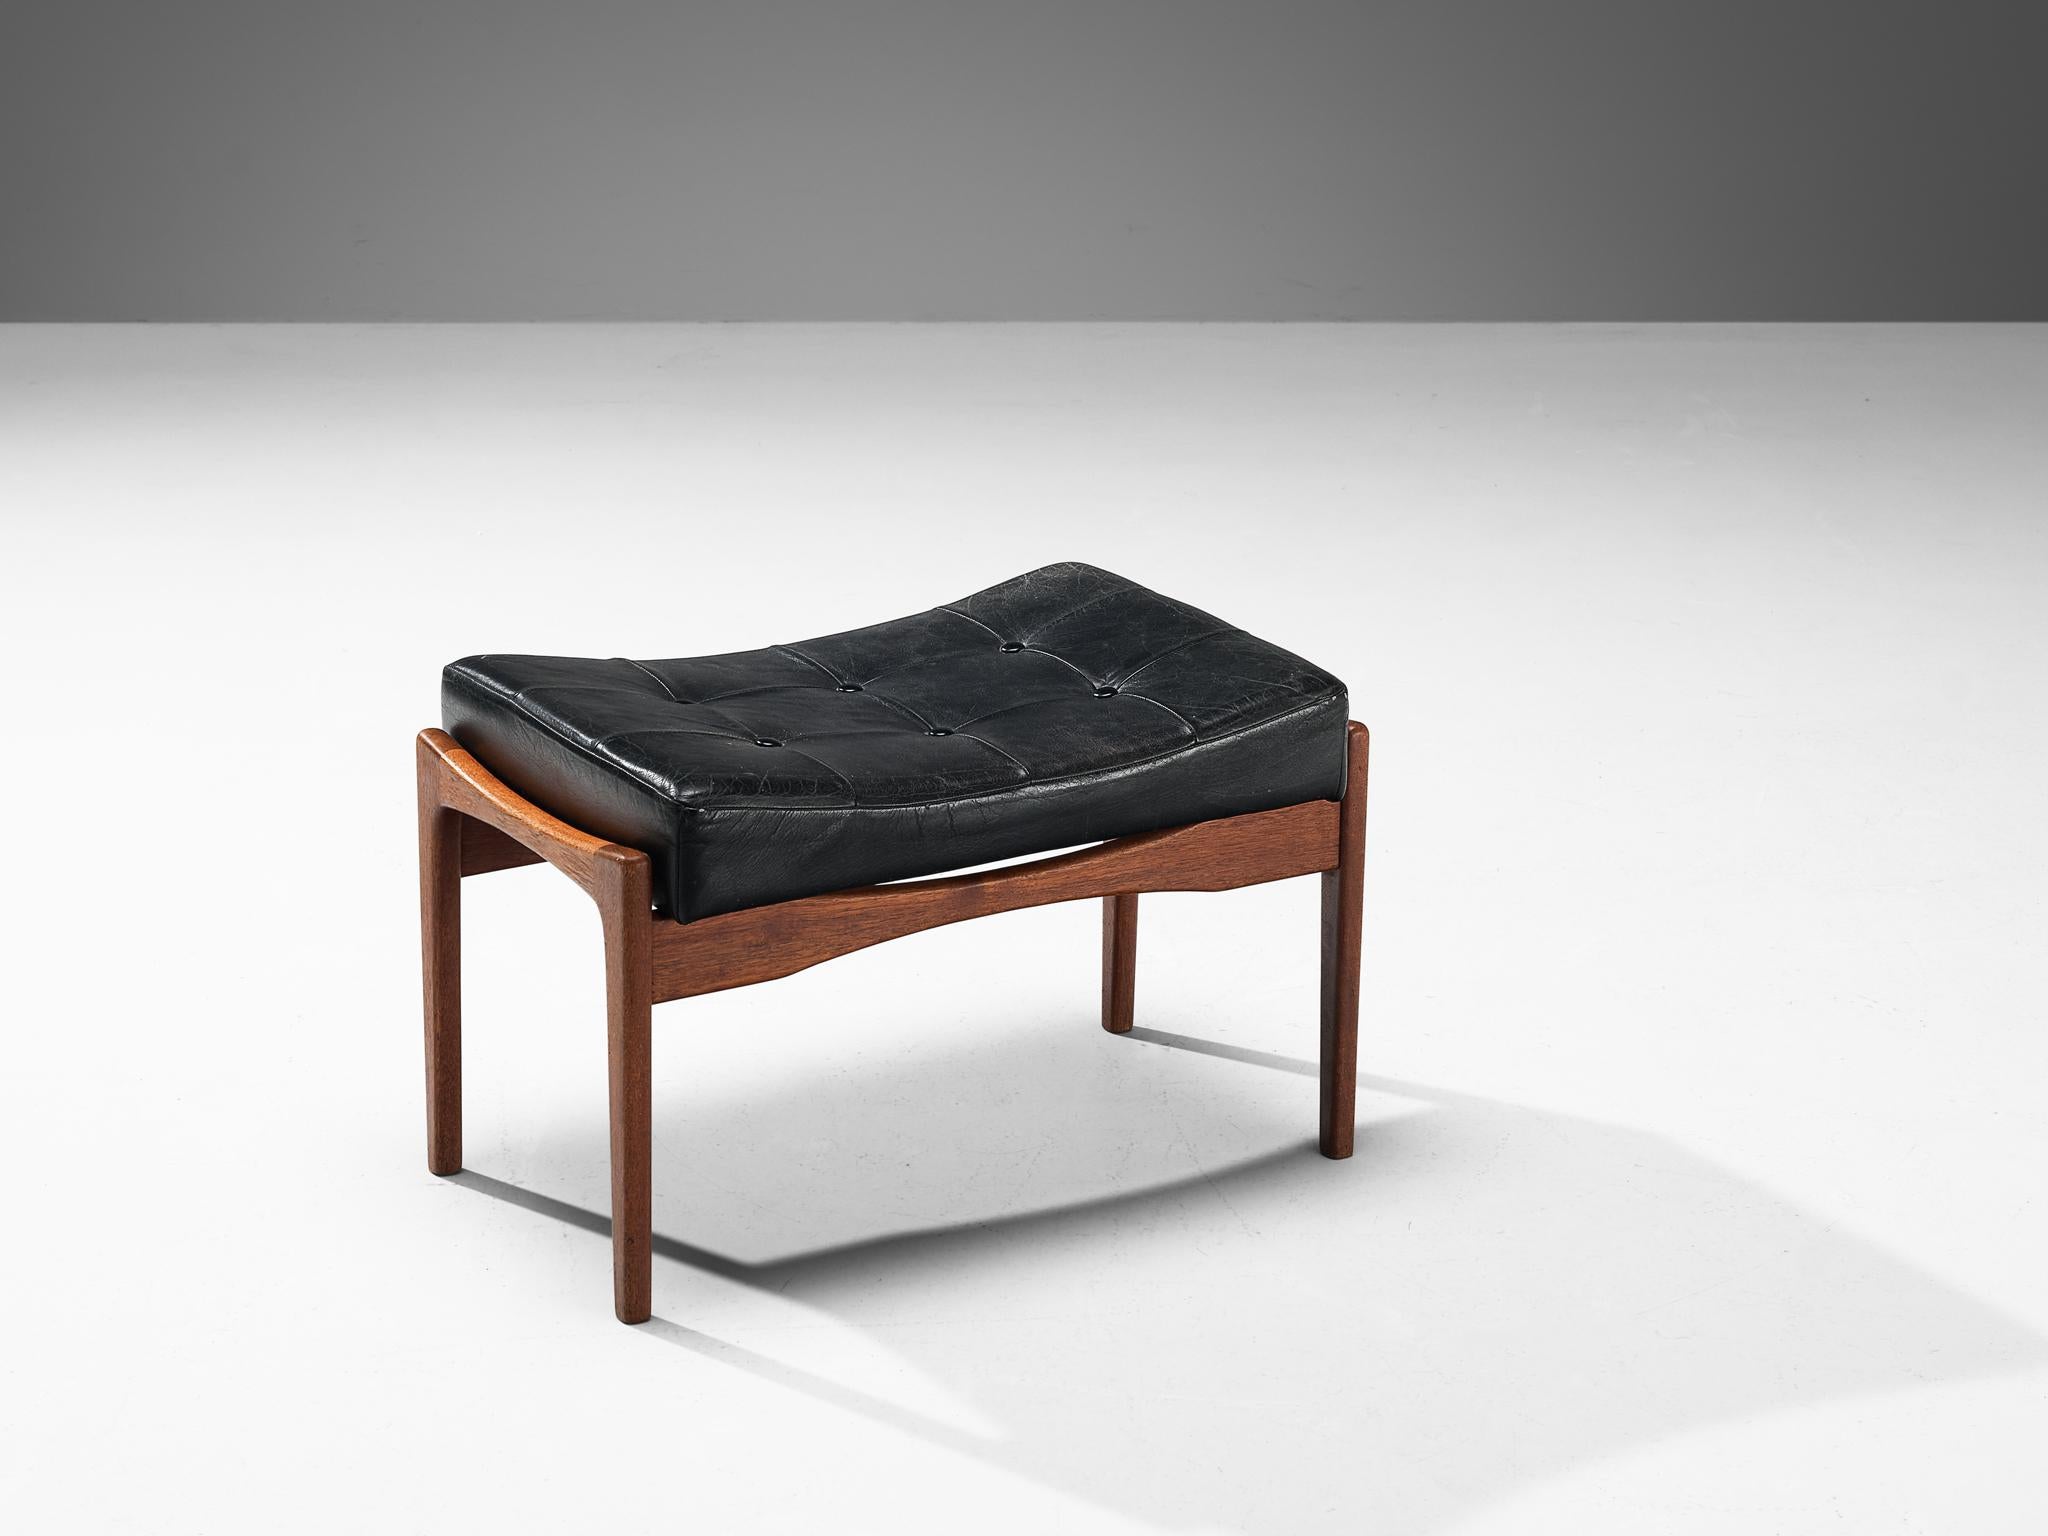 Ib Kofod-Larsen for OPE 'Siesta' ottoman or footstool, teak, leather, Denmark, 1960s

This practical and sophisticated piece of furniture is designed by Ib Kofod-Larsen in the 1960s. Perfect for a guest to sit on during a larger gathering than